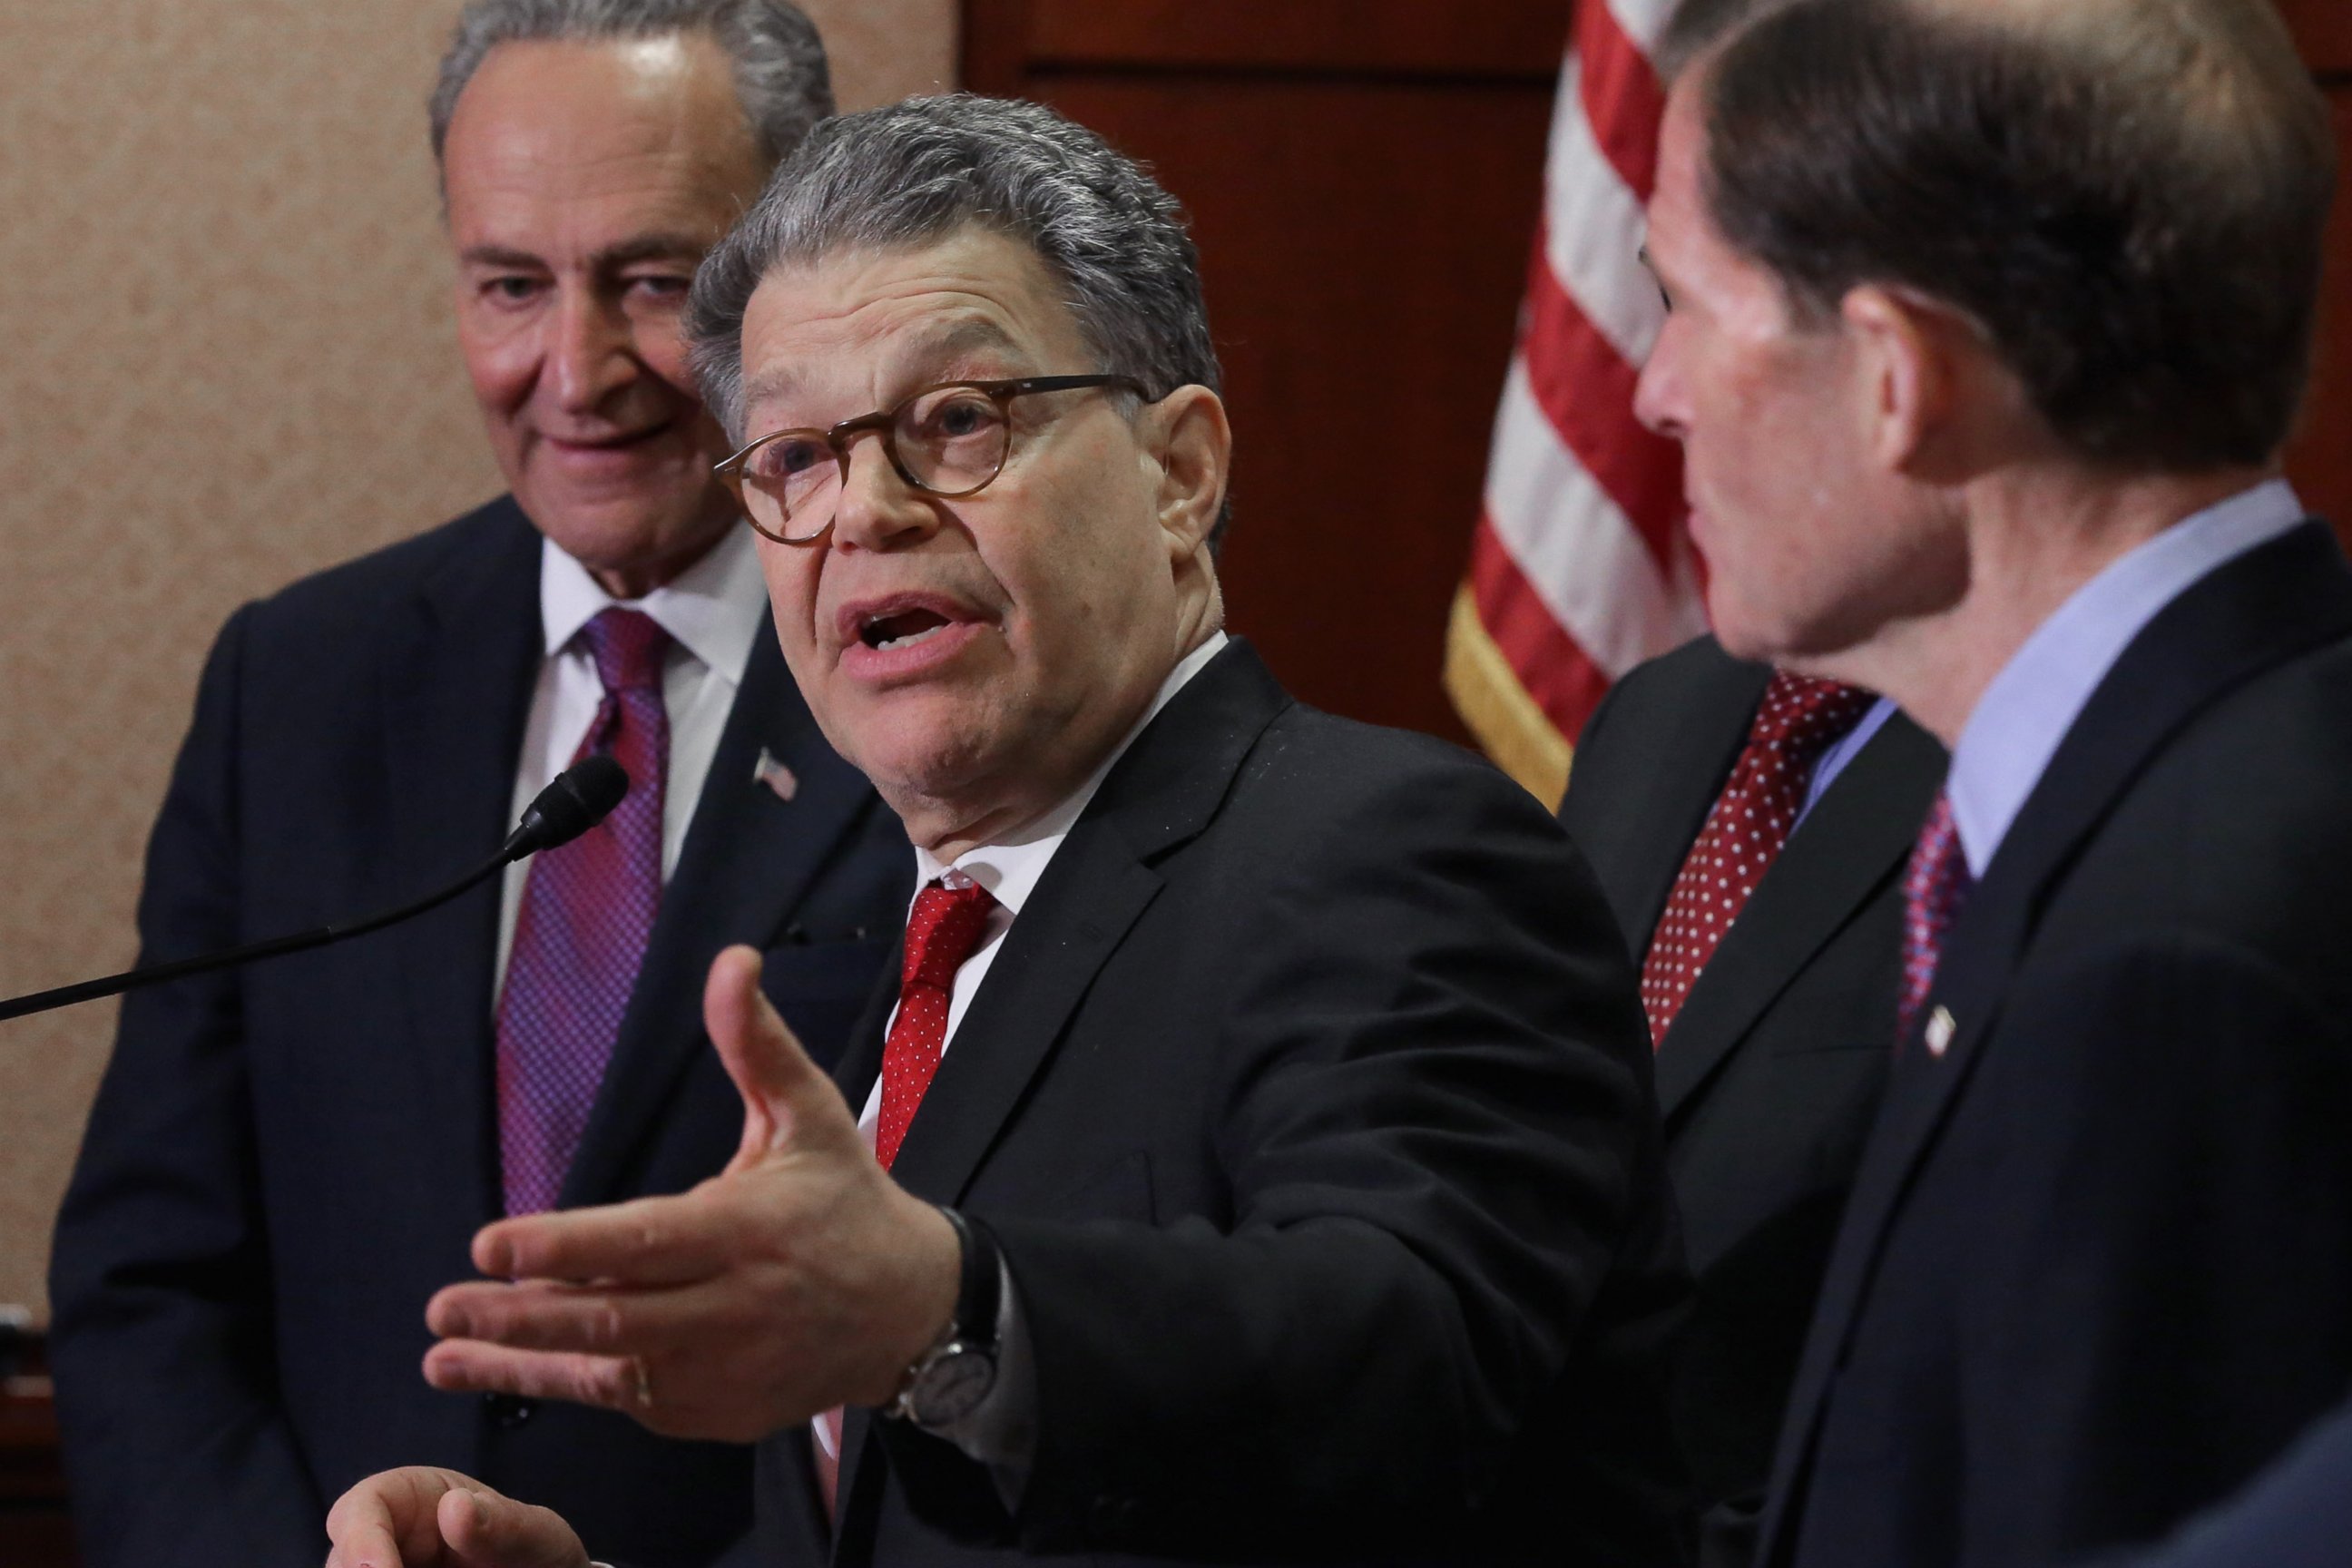 PHOTO:Sen. Al Franken is joined by Sen. Charles Schumer and Sen. Richard Blumenthal during a rally demanding that Senate Republicans give a Supreme Court nominee a fair hearing and vote at the U.S. Capitol, Feb. 24, 2016, in Washington.  